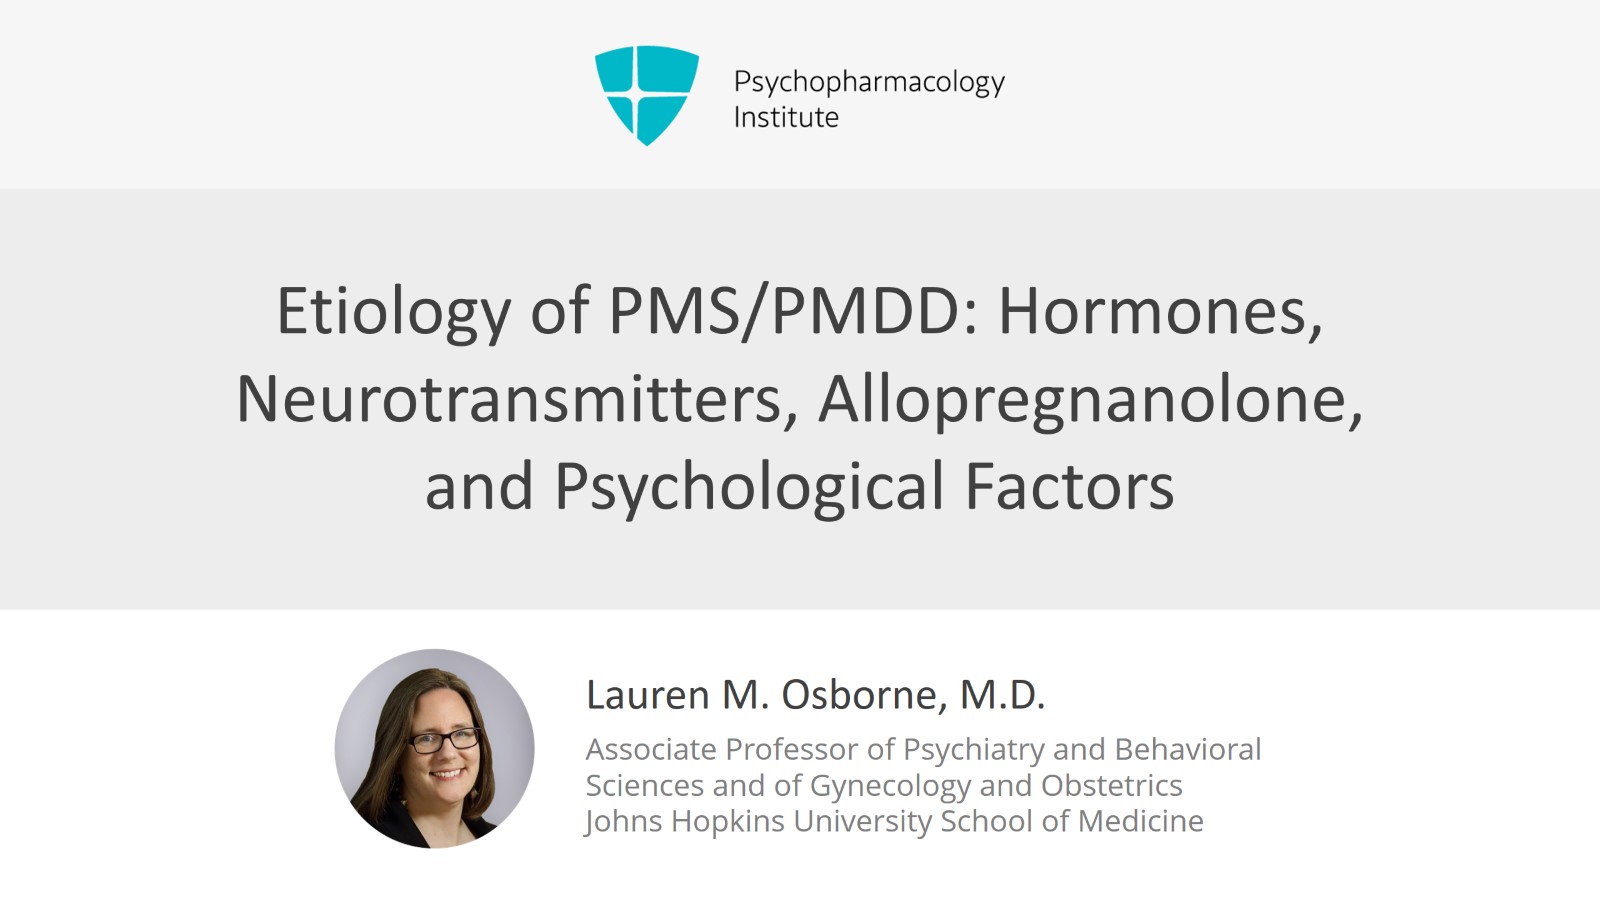 Premenstrual Dysphoric Disorder: Causes and Risk Factors